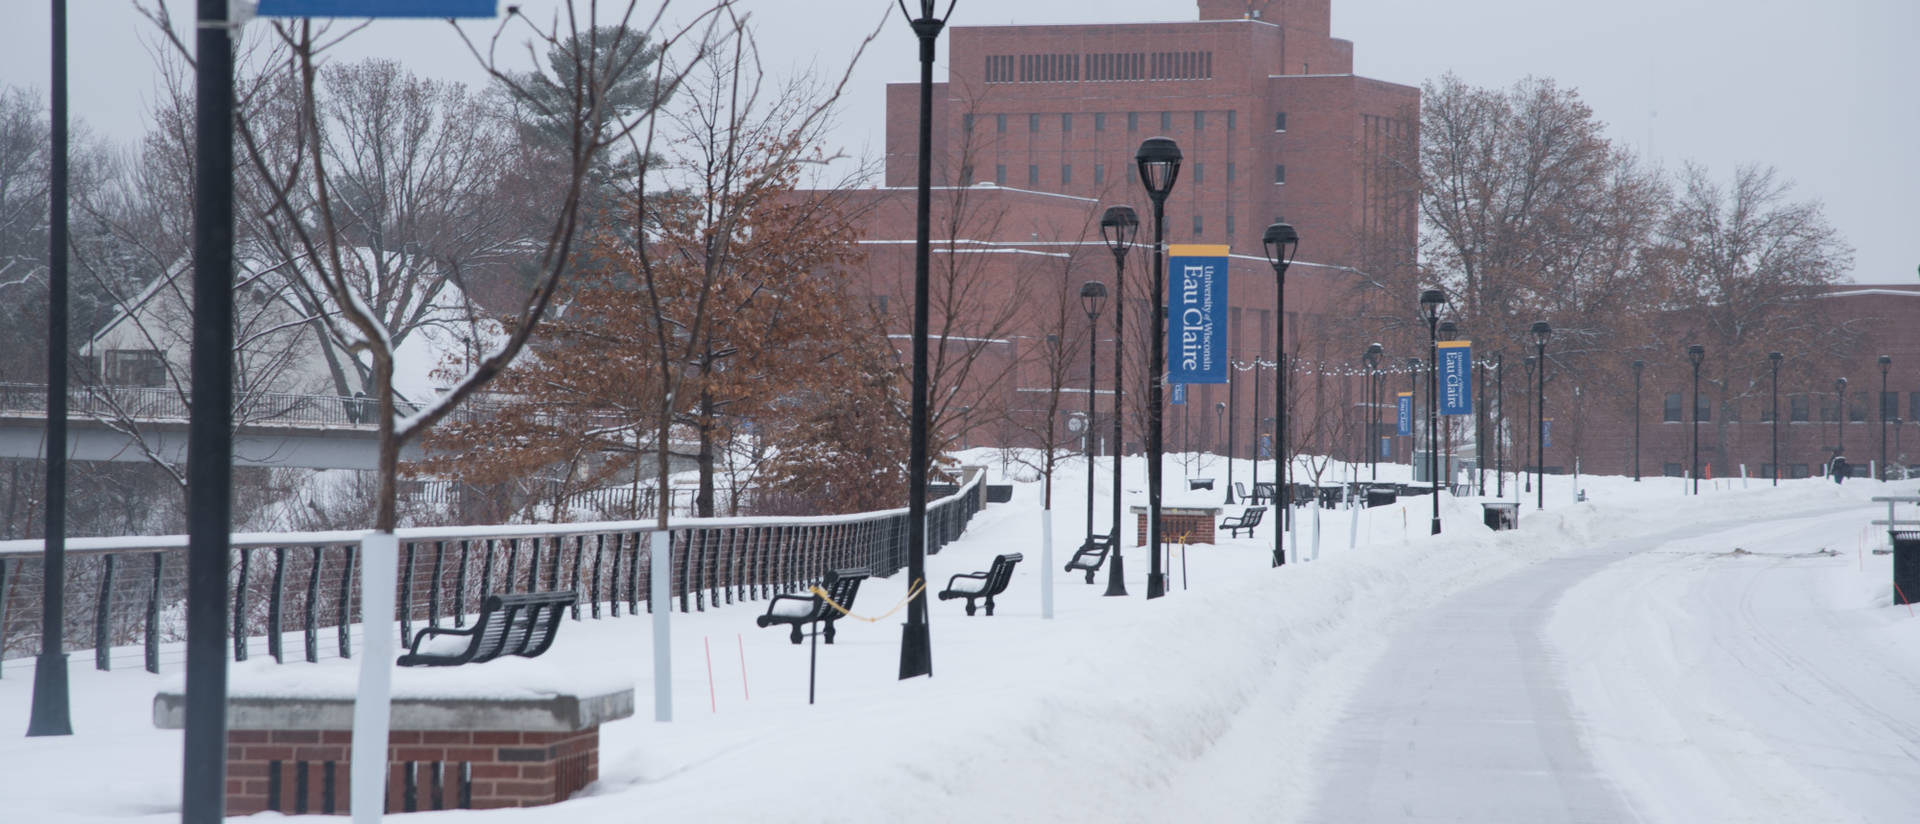 Lower campus in winter